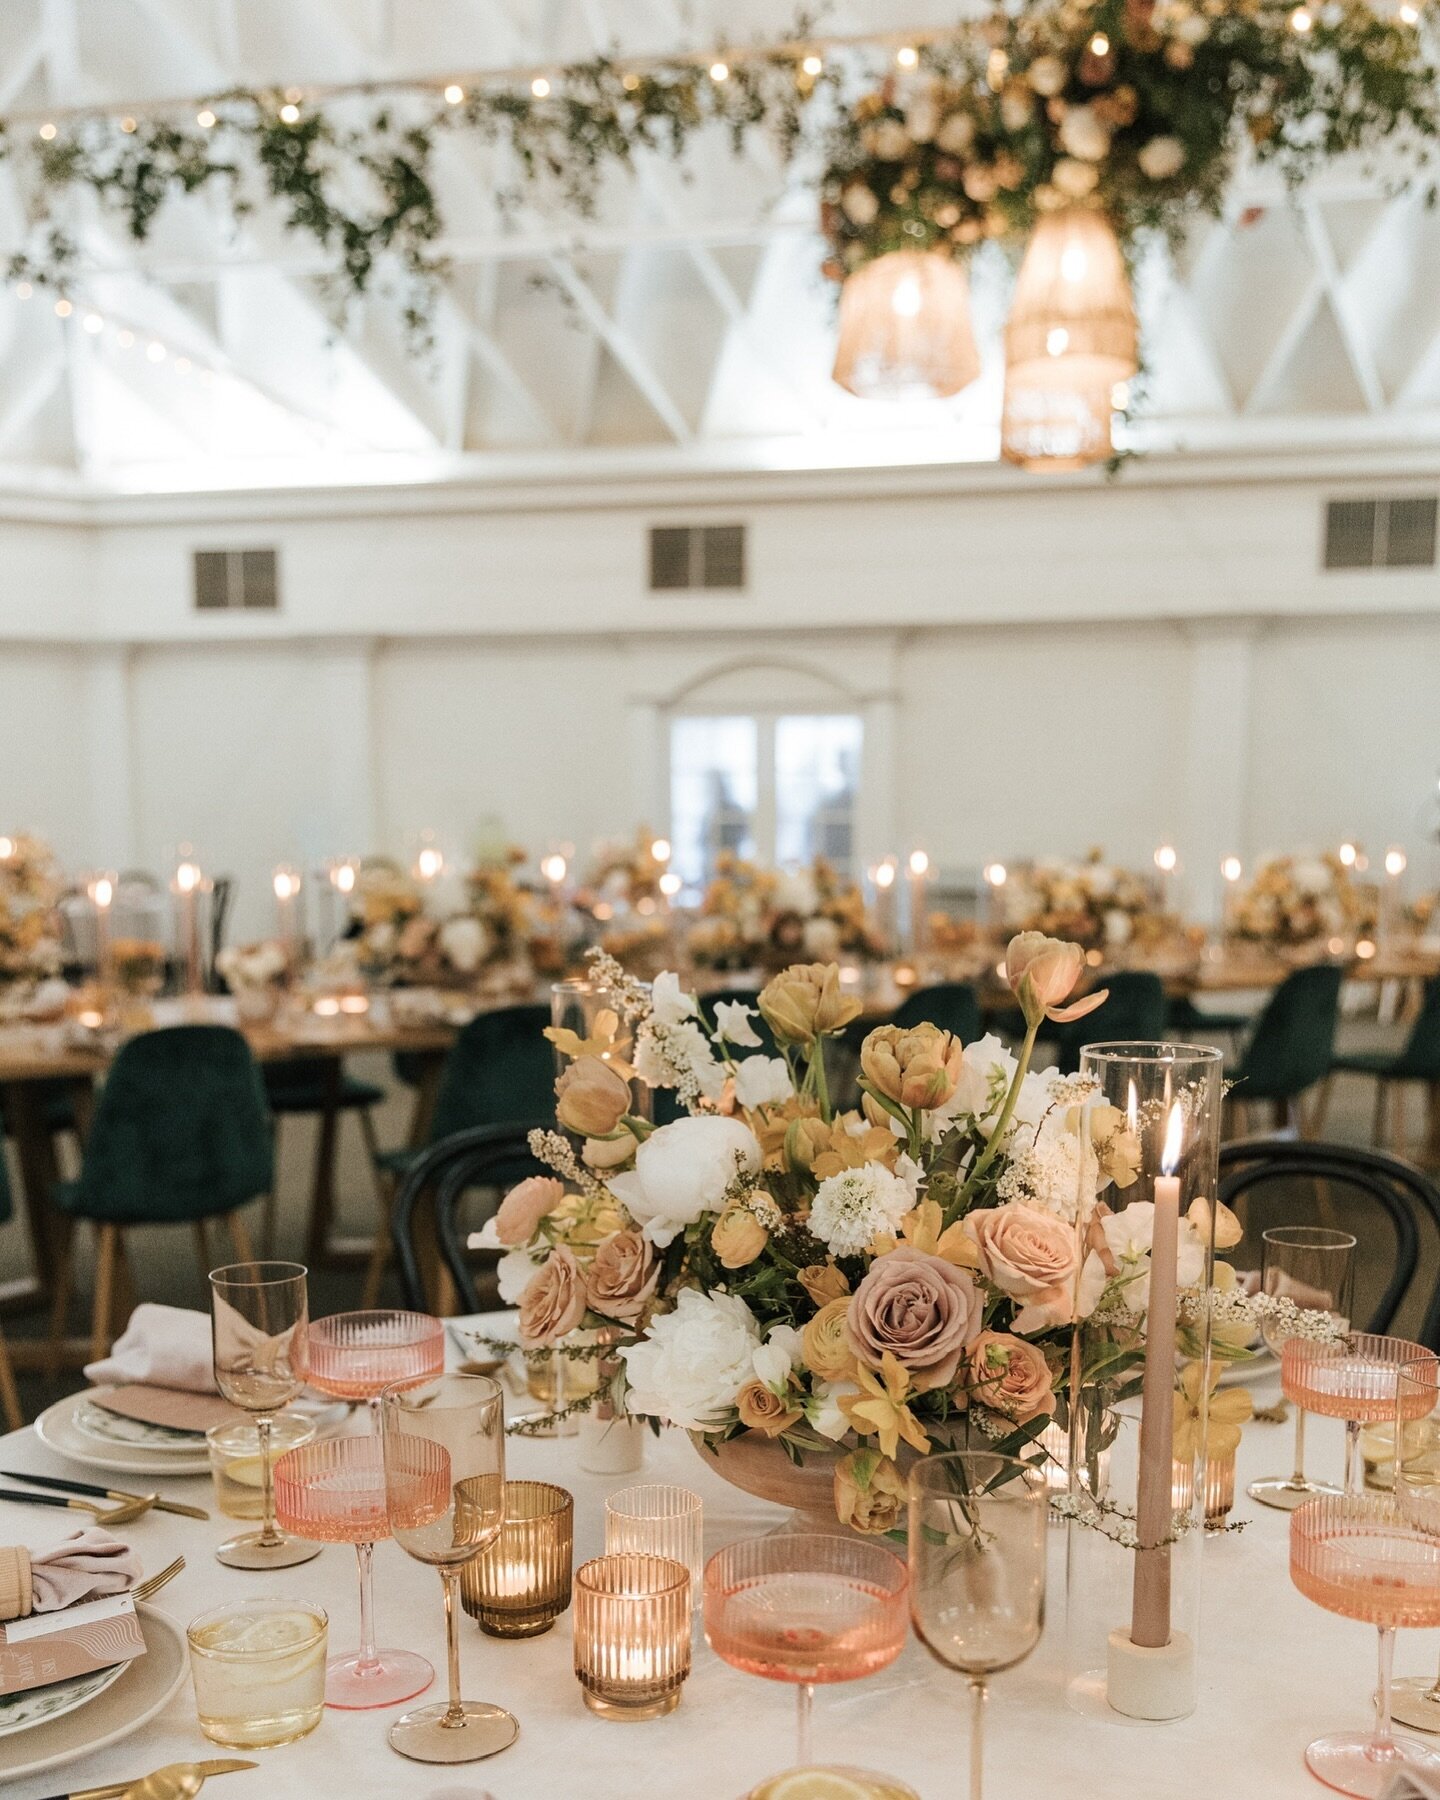 who said an indoor reception can&rsquo;t be an enchanted garden 🤍

Venue + Bar: @thecasinosc
Catering: @jayscatering
Planning + Design: @fetelledesigns
Photography: @sydneybliss_photo
Florals: @joyofbloomflorals
Specialty Rentals: @adorefolklore
Tab